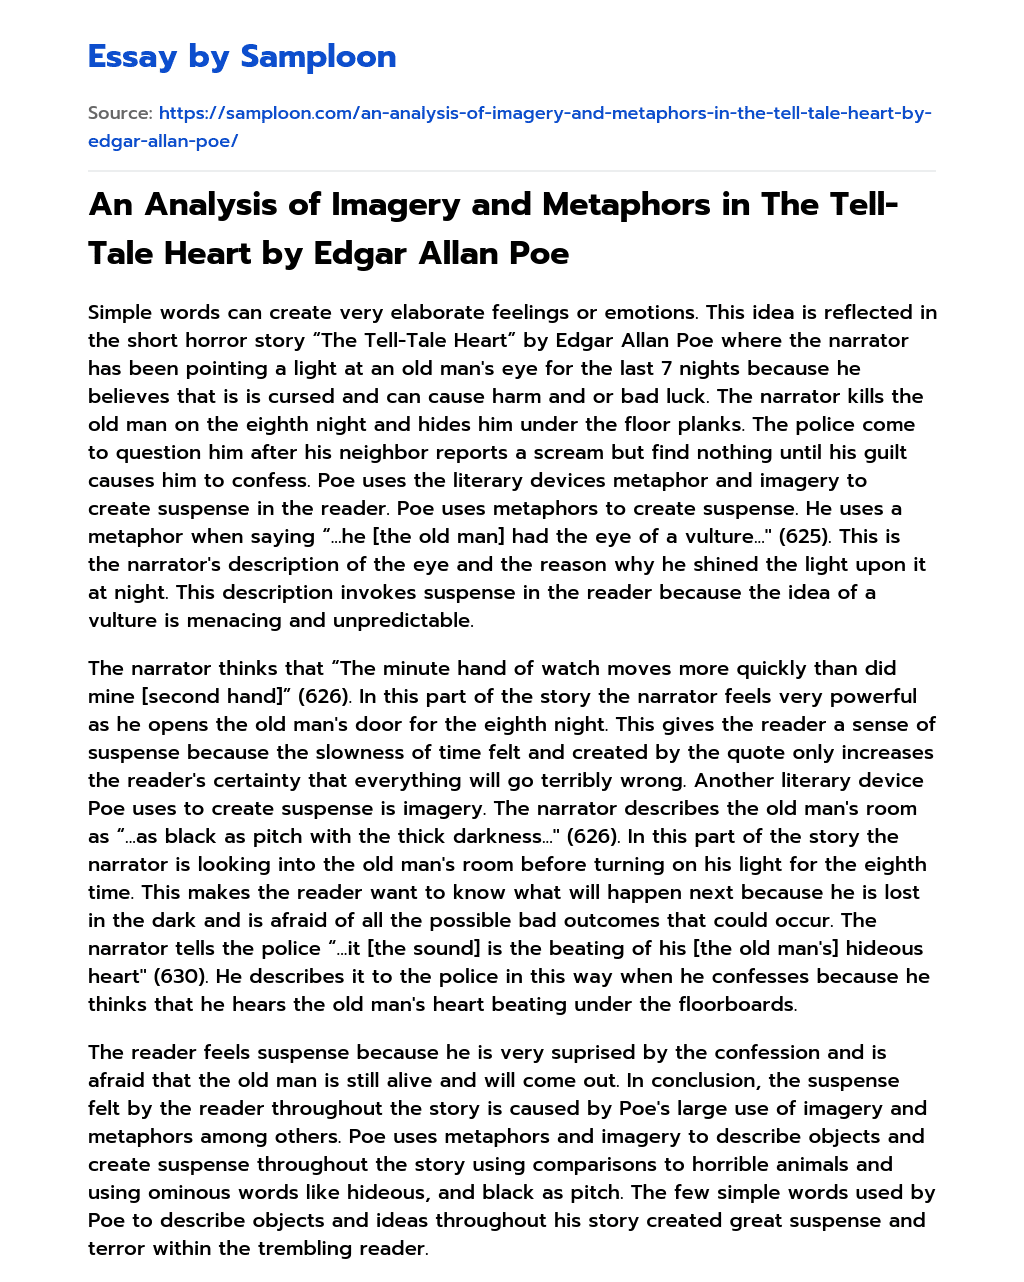 An Analysis of Imagery and Metaphors in The Tell-Tale Heart by Edgar Allan Poe essay